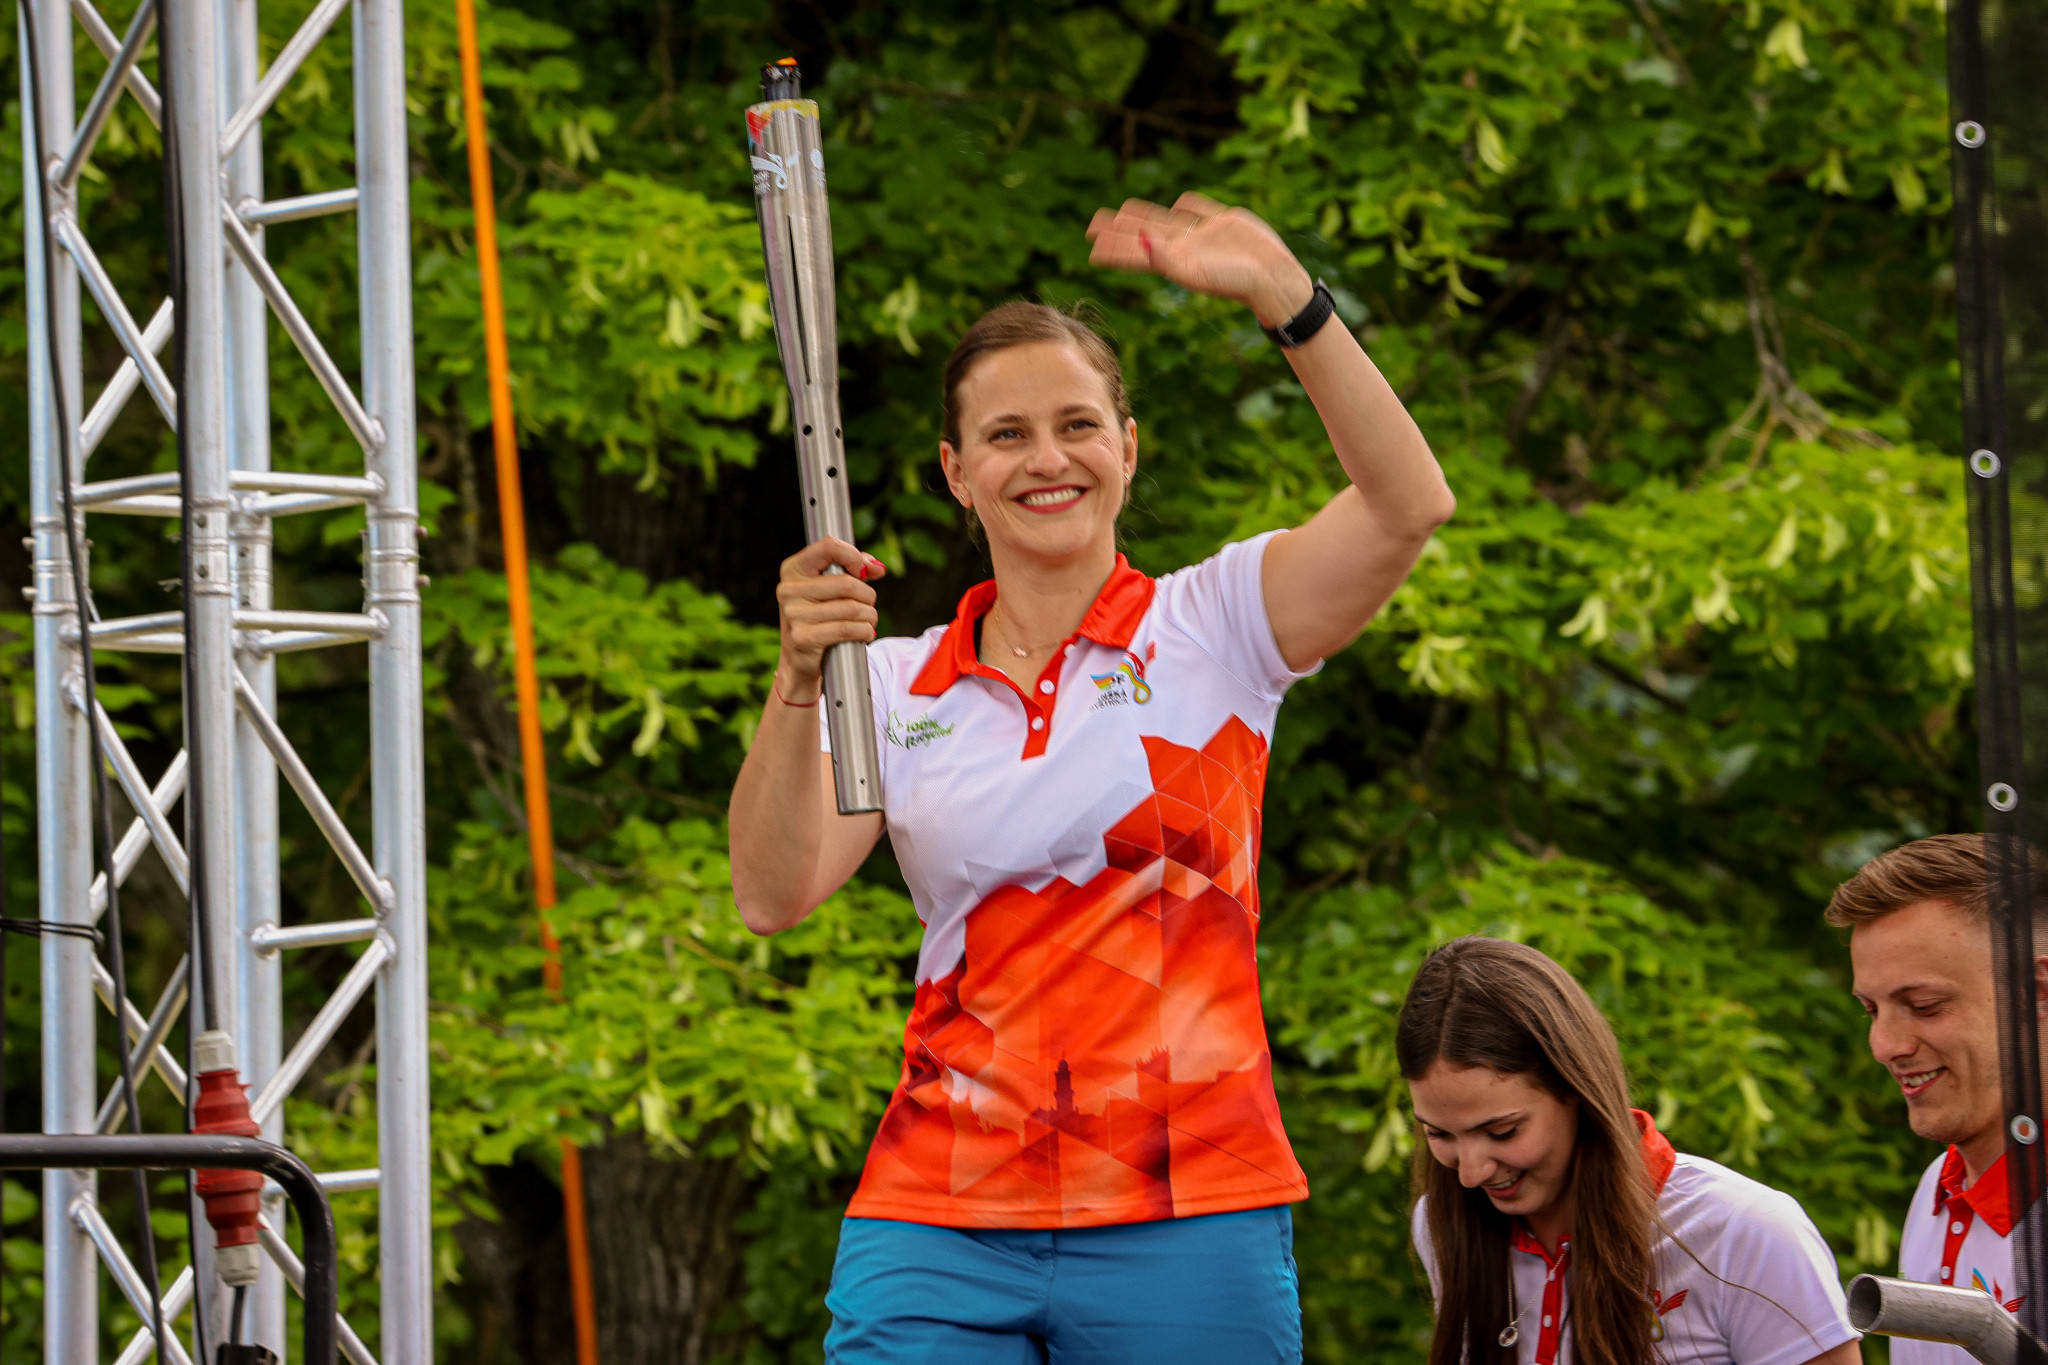 Olympic shooting bronze medallist Danka Barteková accompanied the Flame throughout its 14-hour journey from Rome ©EYOF 2022